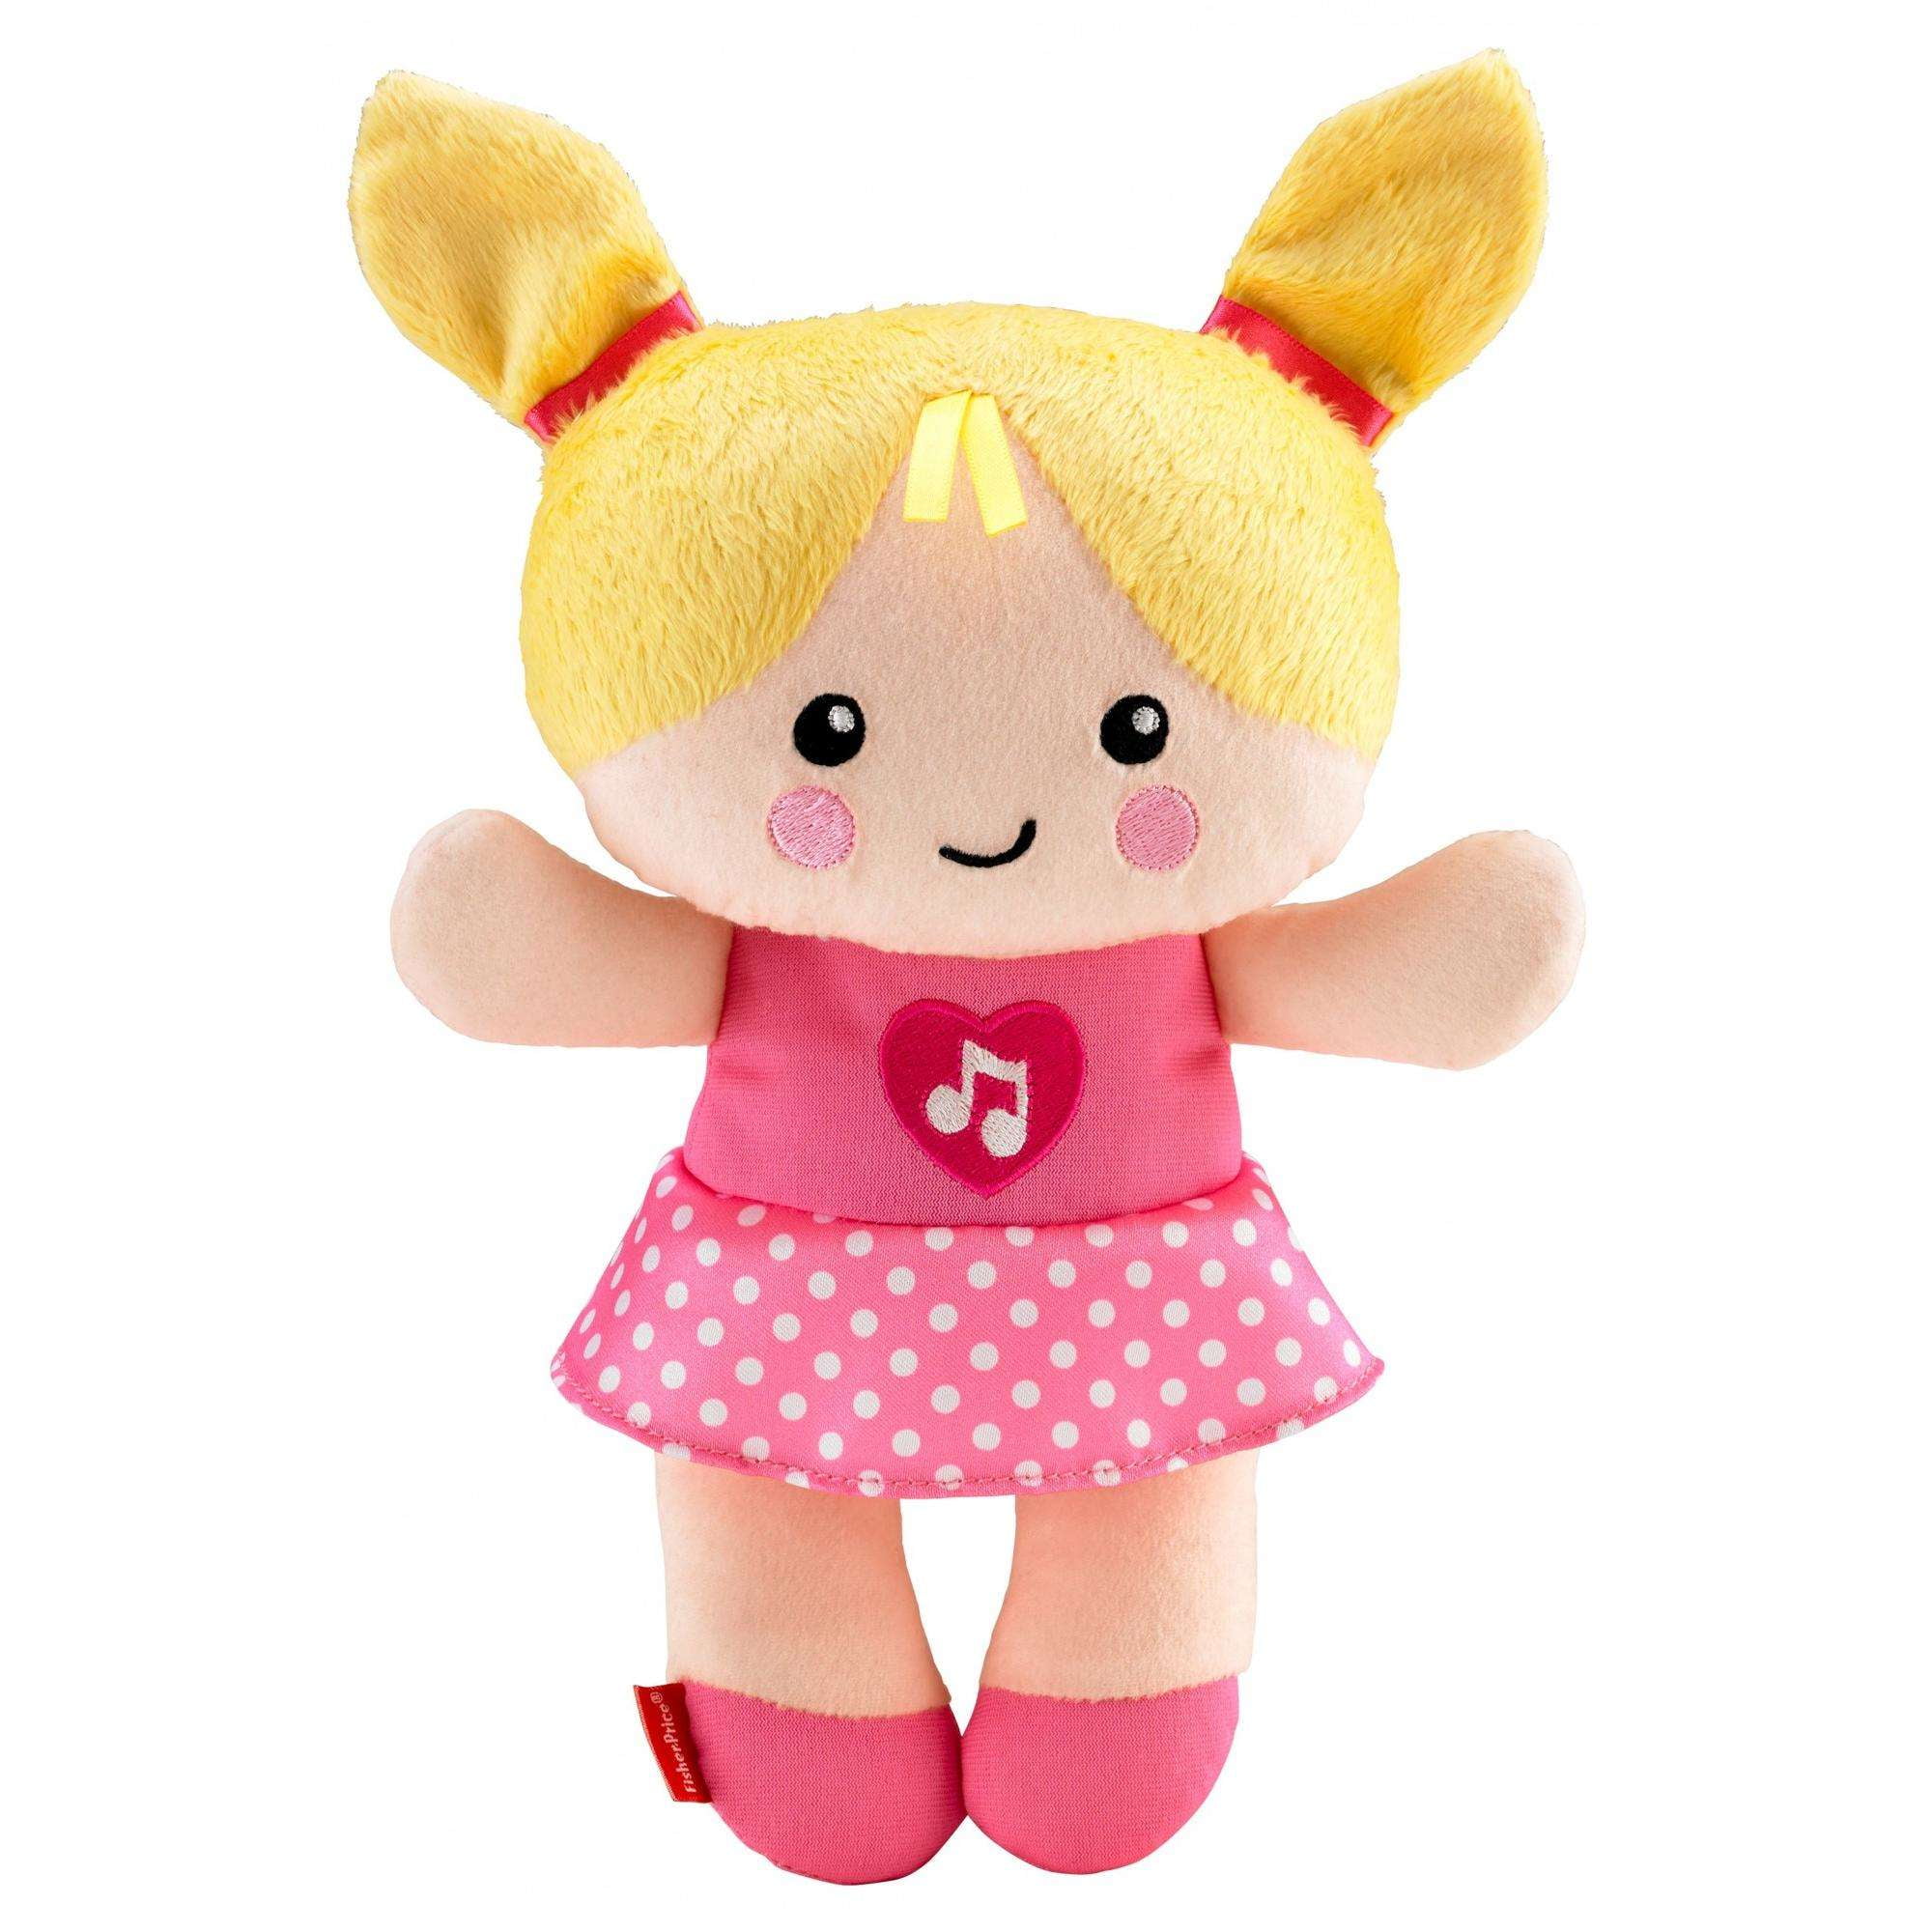 FisherPrice Silly & Sweet Baby Doll